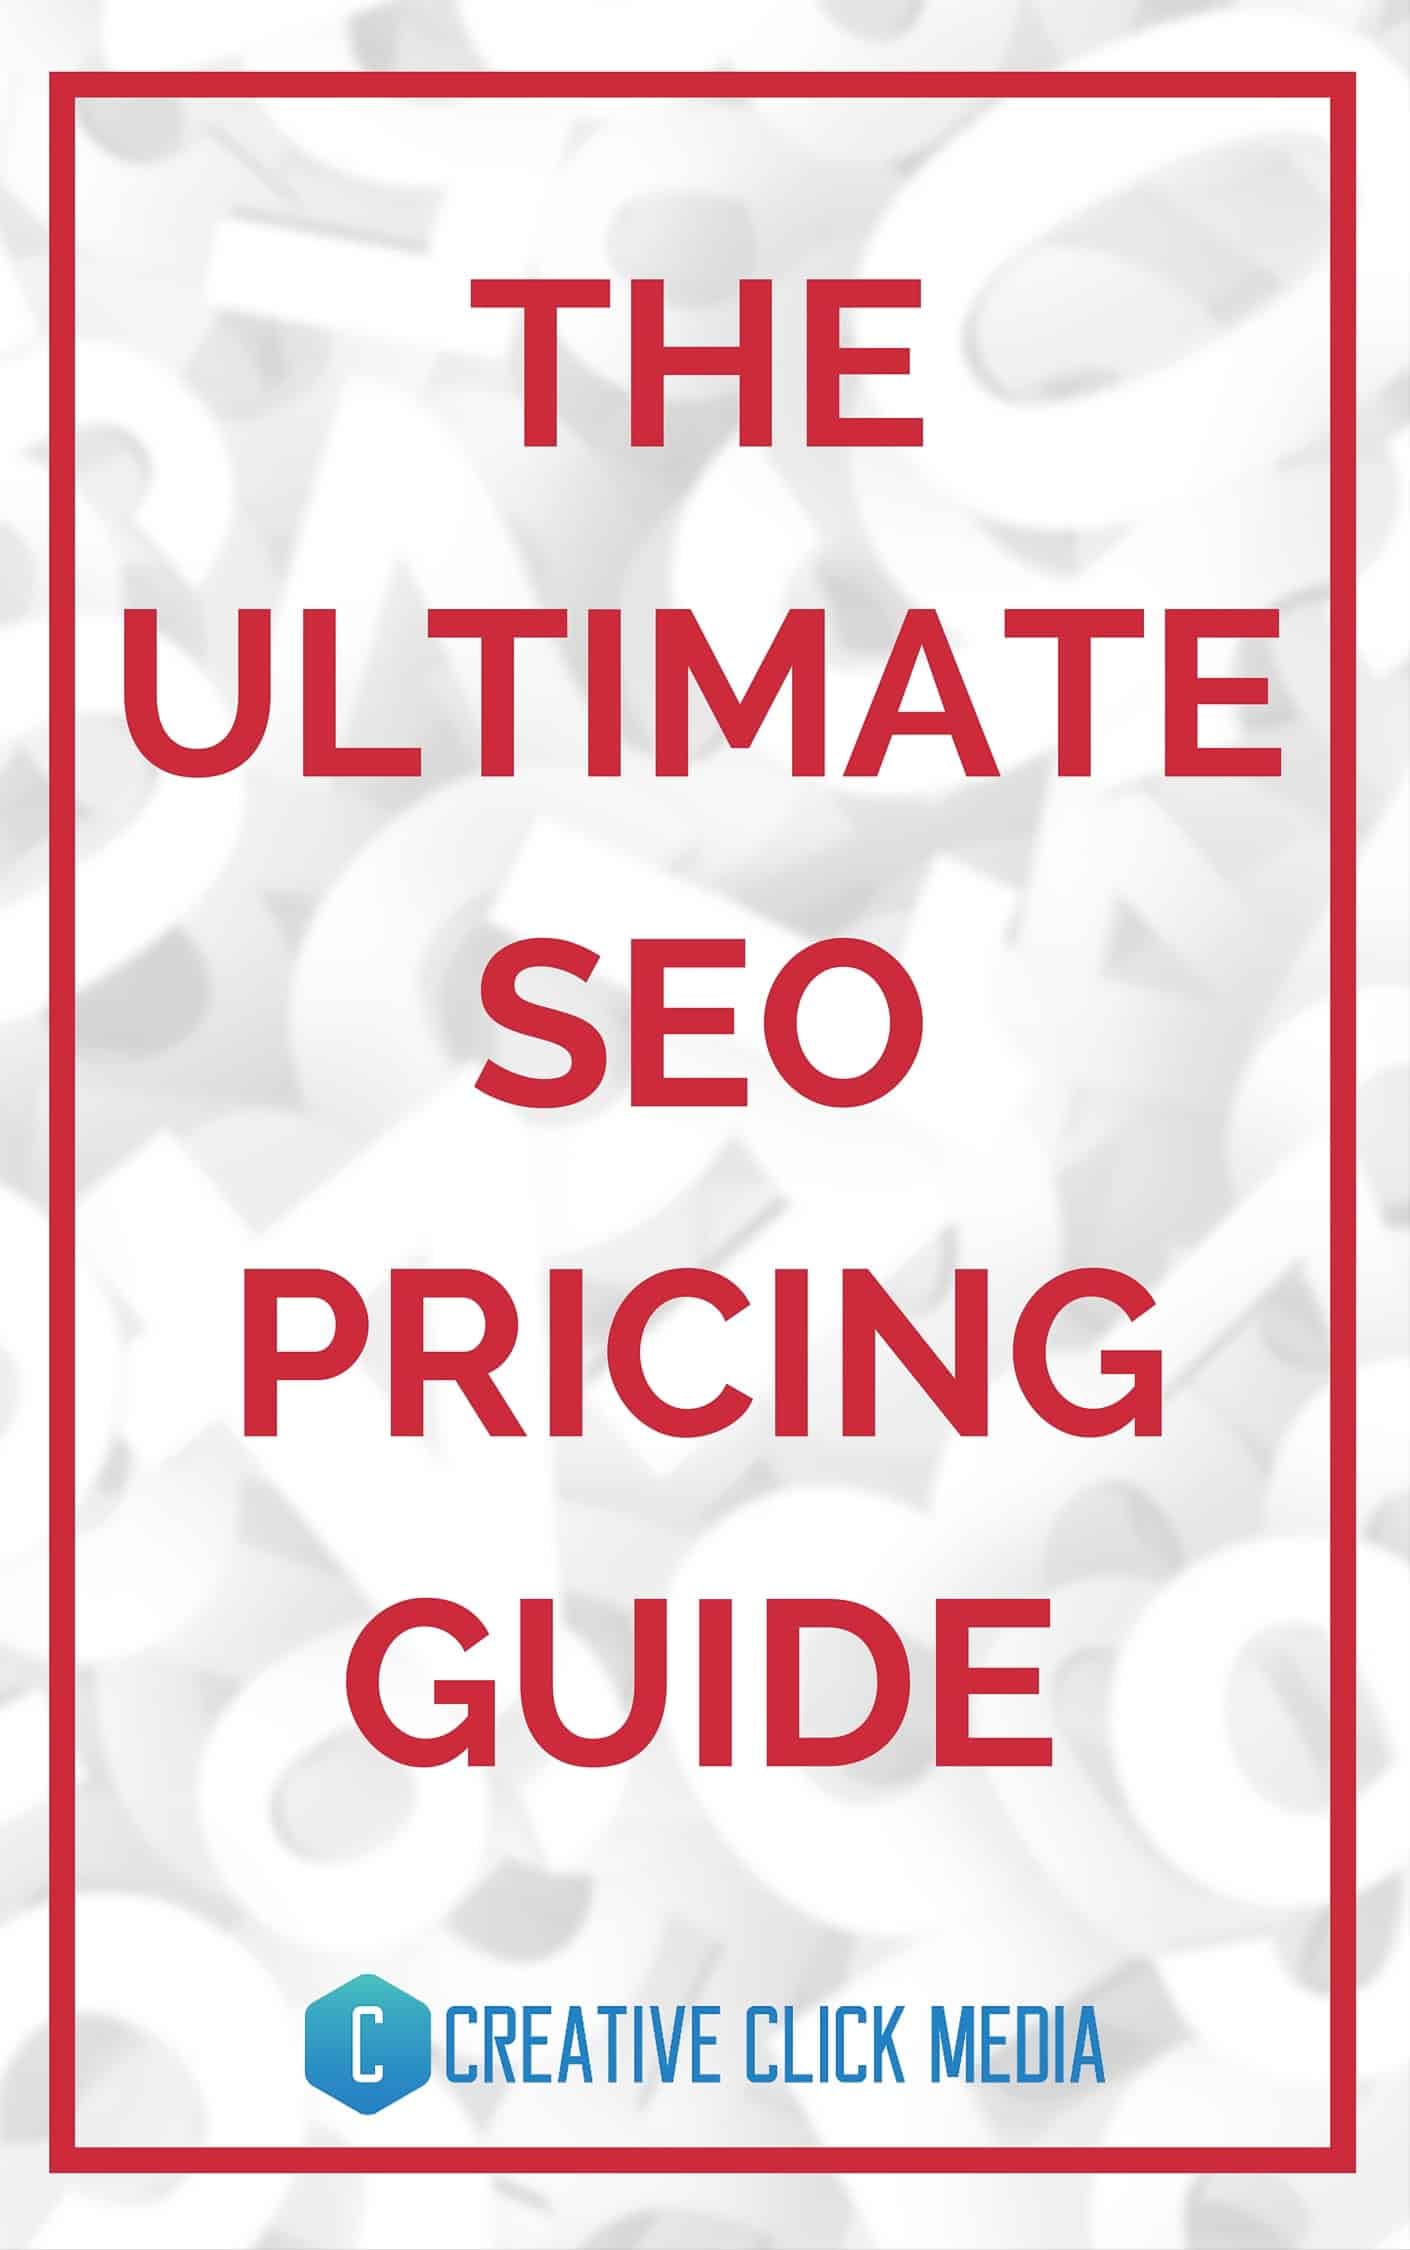 The Ultimate SEO Pricing Guide (2)